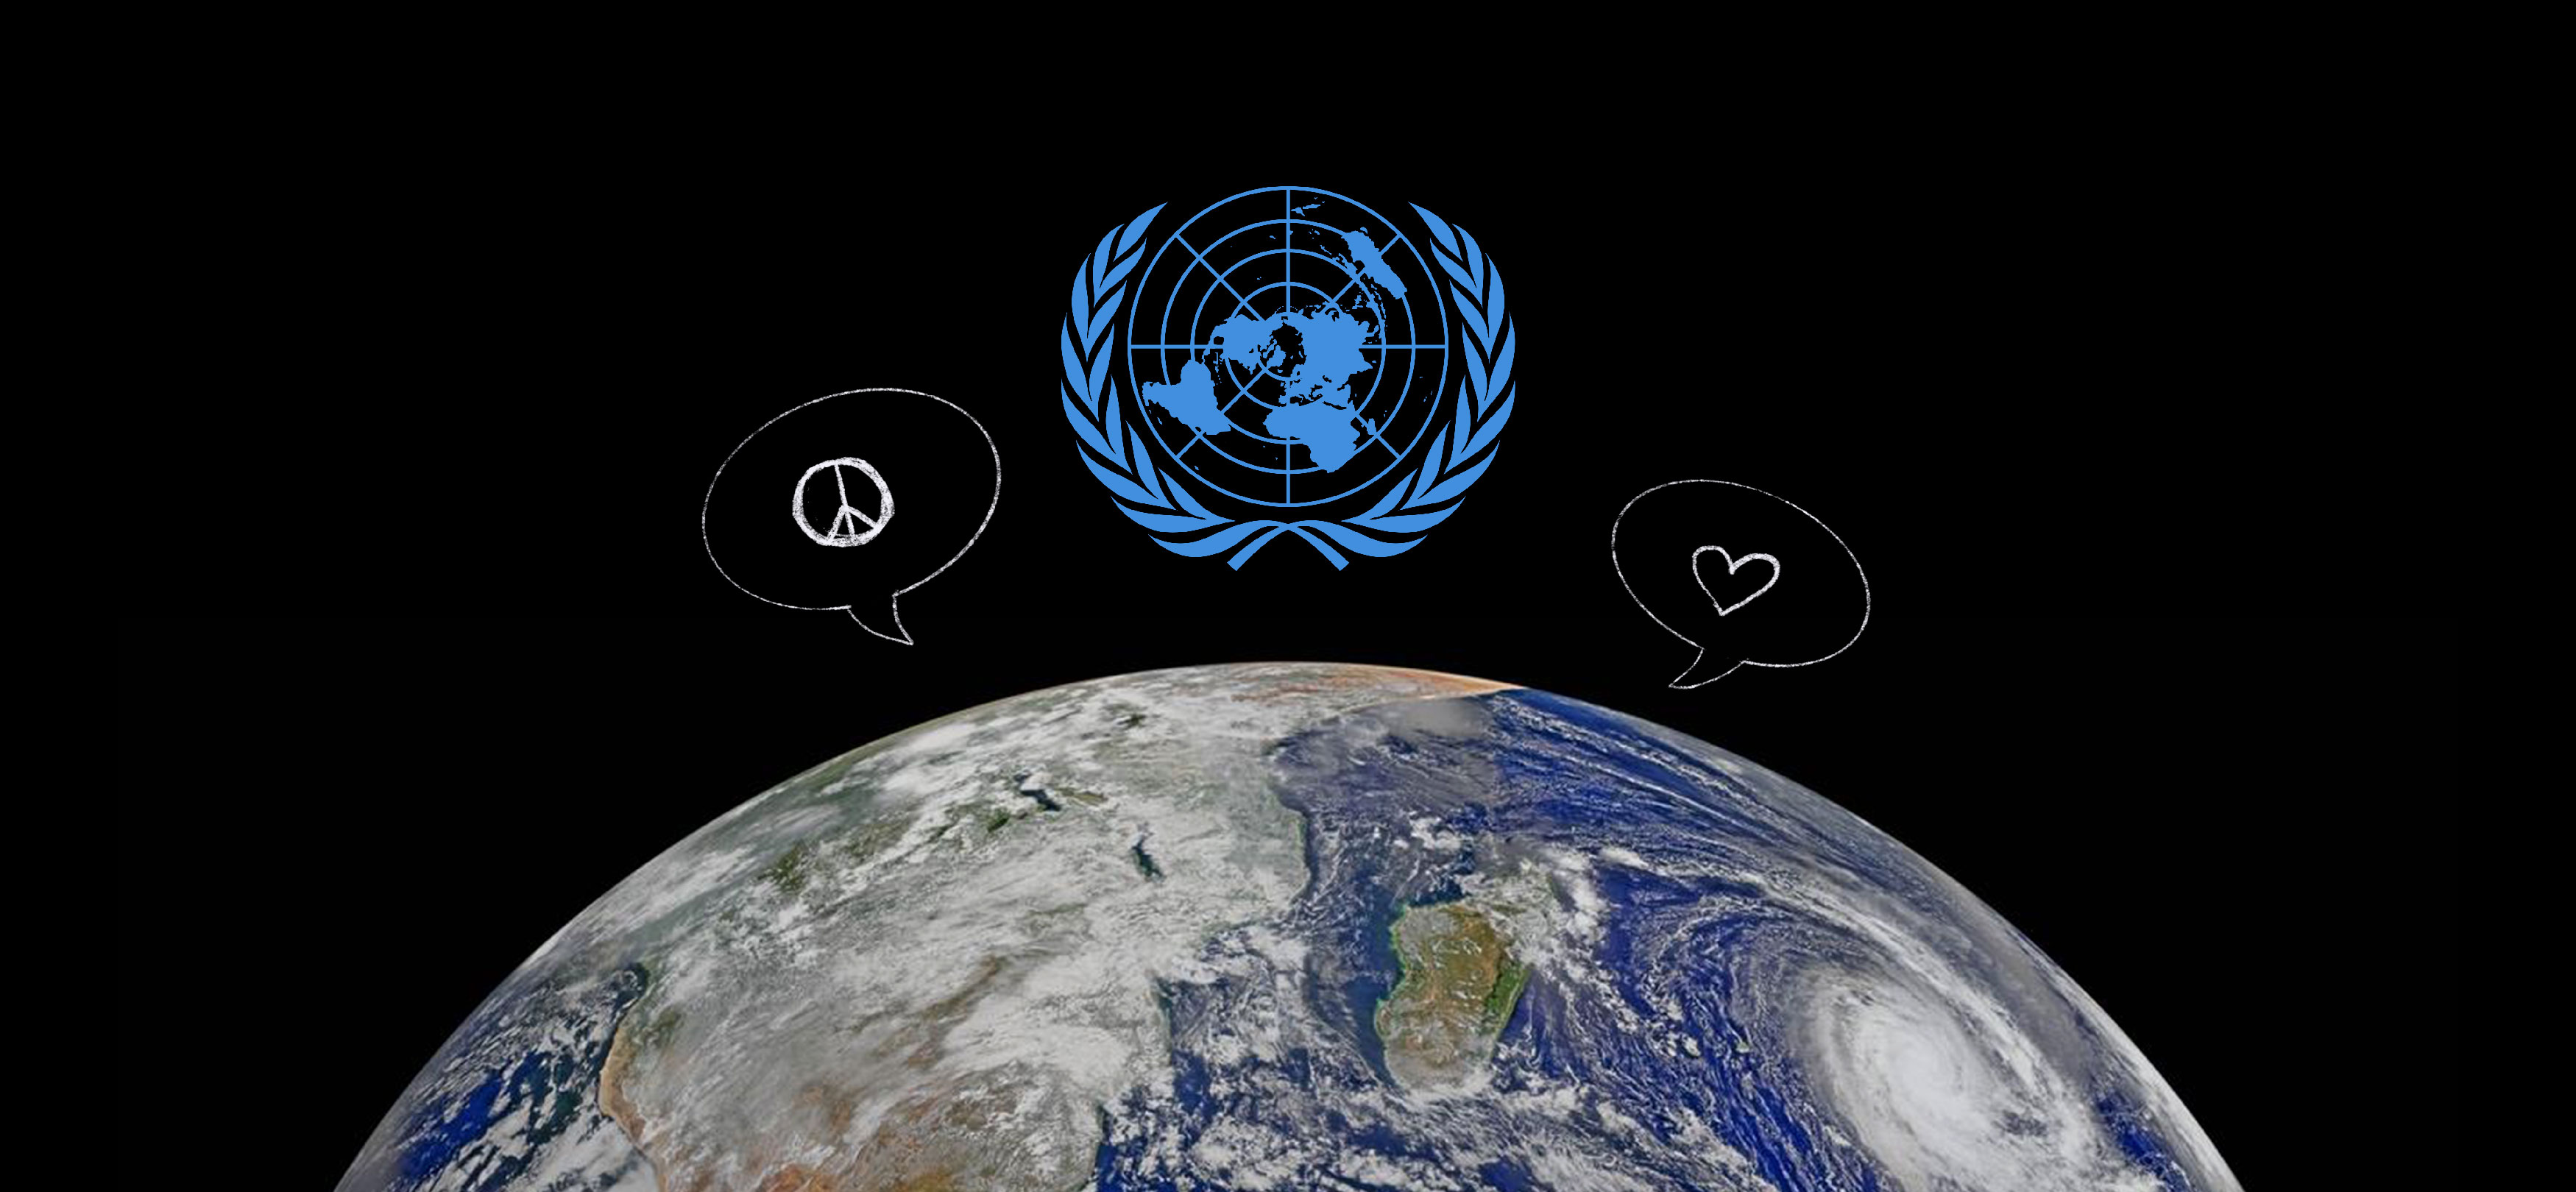 The Earth, with two drawn on speech bubbles showing a peace sign and a heart, as well as the UN logo.